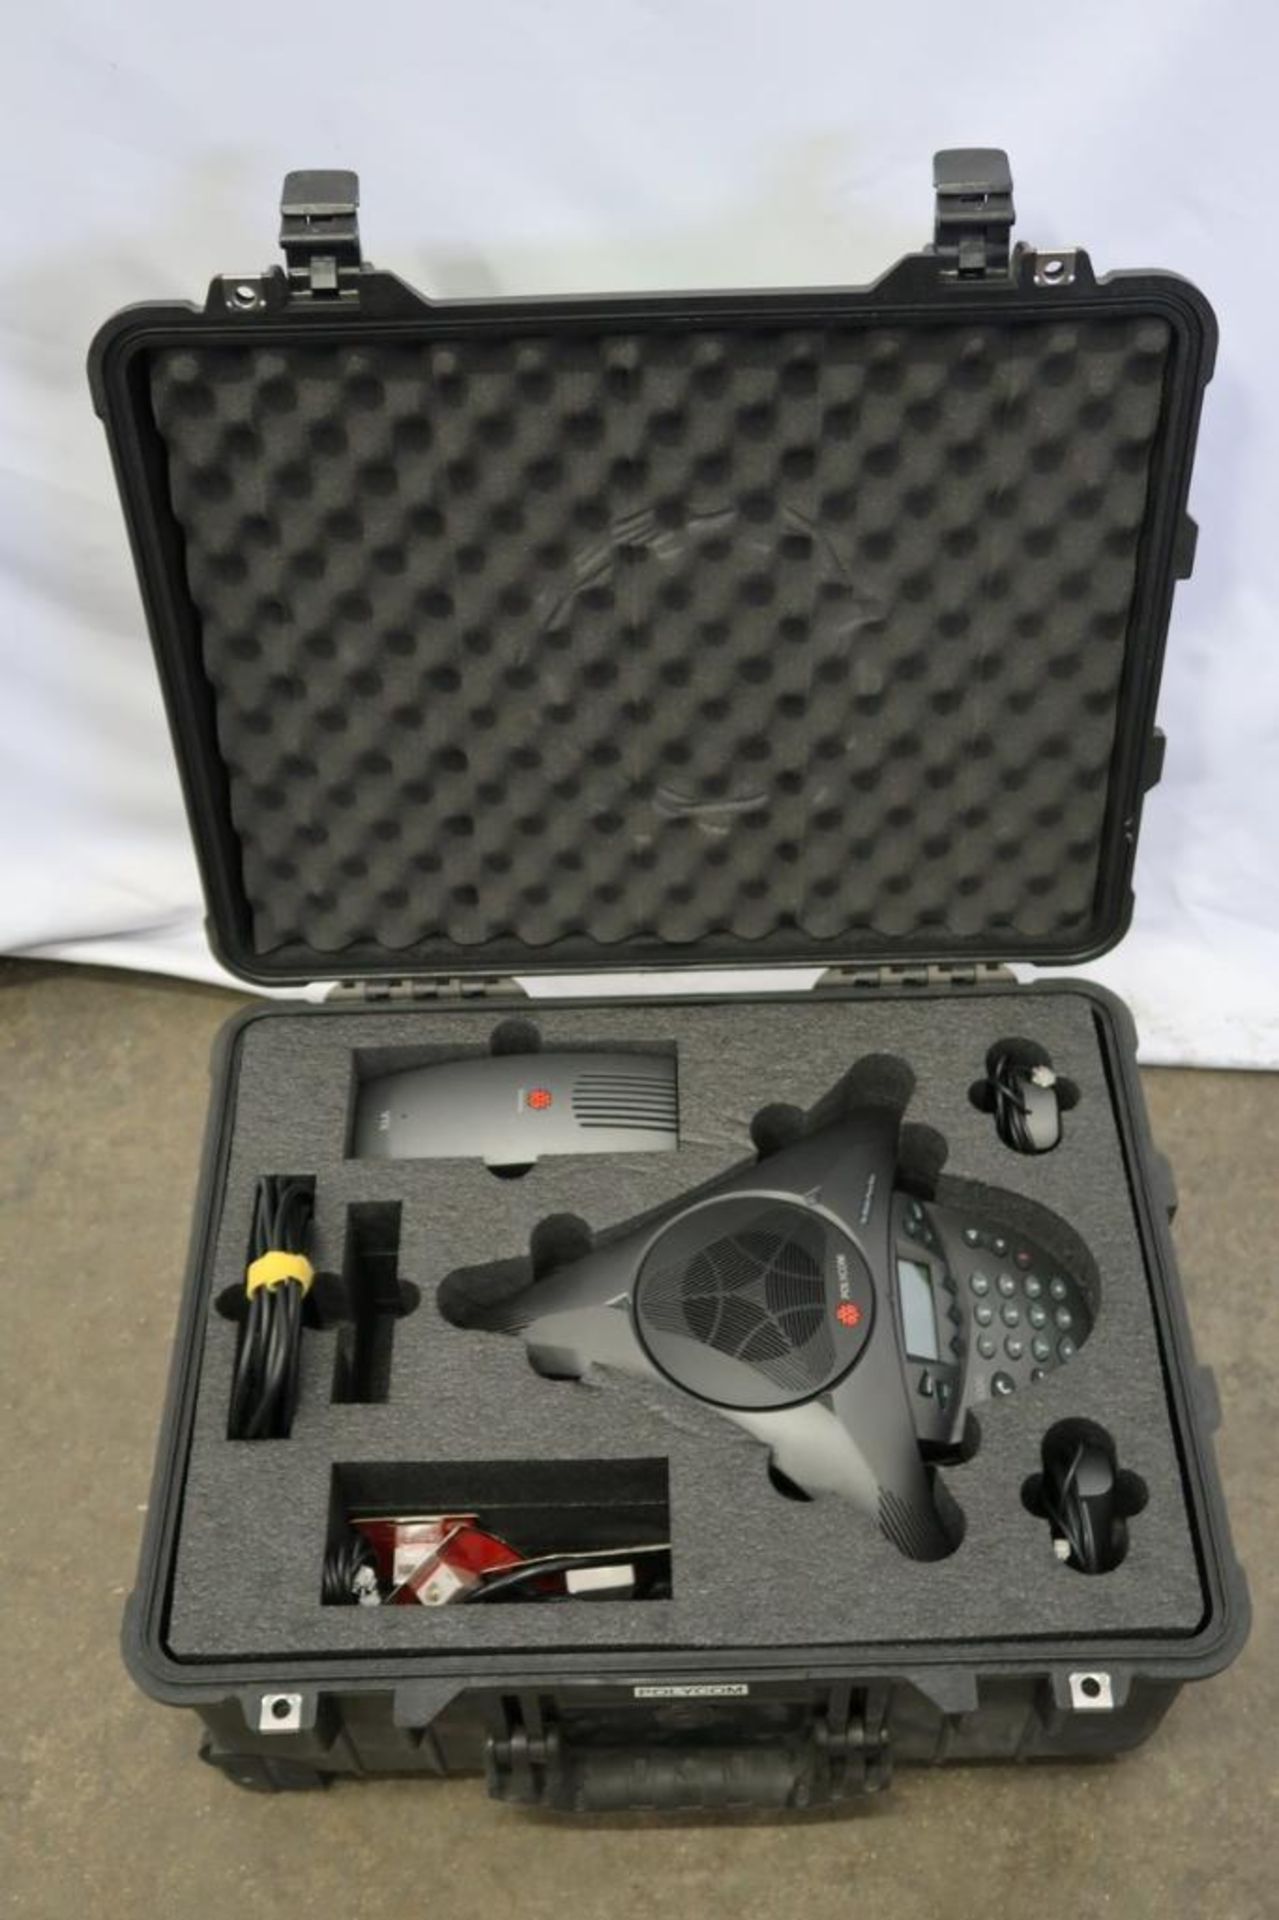 Polycom VTX1000 Phone Conference Phone with Pelican 1560 Hard Plastic Roller Case - Image 3 of 5